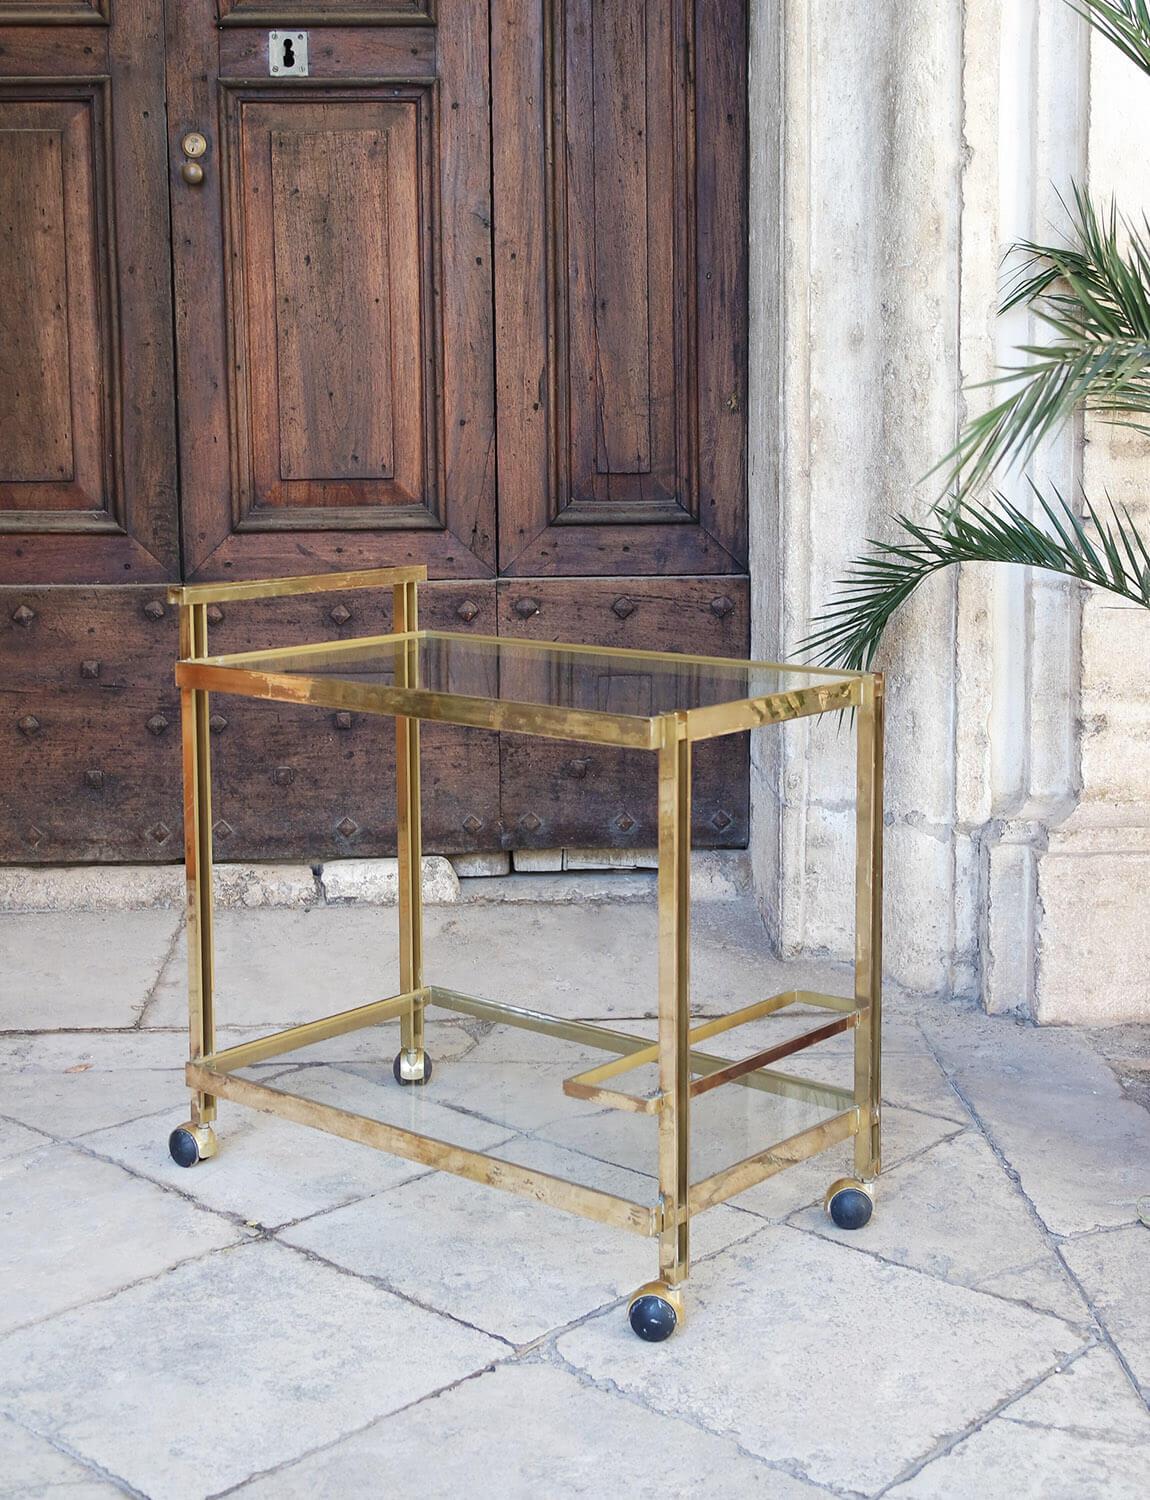 An Italian brass drinks trolley likely made in the 1980s. It has a brass frame and two glass shelves as well as an area on the bottom shelf to store three wine bottles. The trolley has four rubber wheels. This is a beautiful piece. Please note as